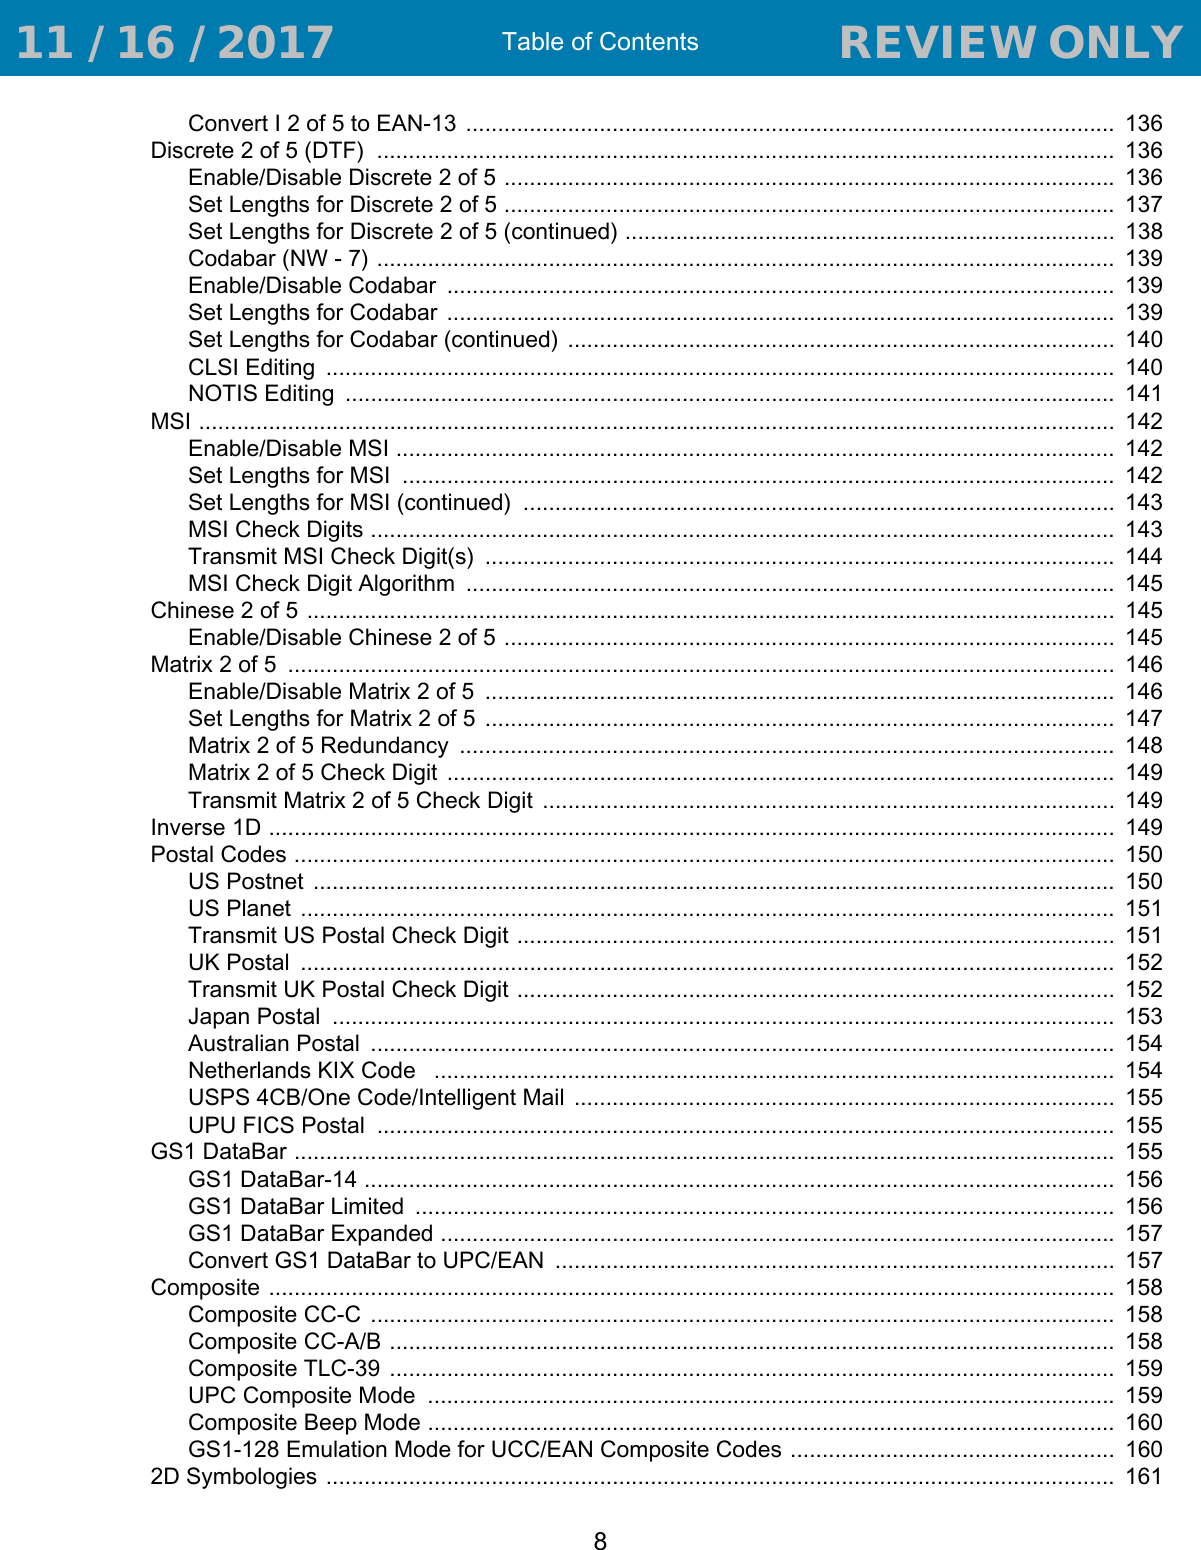 Table of Contents8Convert I 2 of 5 to EAN-13 ......................................................................................................  136Discrete 2 of 5 (DTF)  ....................................................................................................................  136Enable/Disable Discrete 2 of 5 ................................................................................................ 136Set Lengths for Discrete 2 of 5 ................................................................................................  137Set Lengths for Discrete 2 of 5 (continued) .............................................................................  138Codabar (NW - 7) ....................................................................................................................  139Enable/Disable Codabar  .........................................................................................................  139Set Lengths for Codabar .........................................................................................................  139Set Lengths for Codabar (continued) ......................................................................................  140CLSI Editing  ............................................................................................................................  140NOTIS Editing  .........................................................................................................................  141MSI ................................................................................................................................................  142Enable/Disable MSI .................................................................................................................  142Set Lengths for MSI  ................................................................................................................  142Set Lengths for MSI (continued)  .............................................................................................  143MSI Check Digits .....................................................................................................................  143Transmit MSI Check Digit(s)  ................................................................................................... 144MSI Check Digit Algorithm  ......................................................................................................  145Chinese 2 of 5 ...............................................................................................................................  145Enable/Disable Chinese 2 of 5 ................................................................................................  145Matrix 2 of 5  ..................................................................................................................................  146Enable/Disable Matrix 2 of 5  ...................................................................................................  146Set Lengths for Matrix 2 of 5 ...................................................................................................  147Matrix 2 of 5 Redundancy  .......................................................................................................  148Matrix 2 of 5 Check Digit  .........................................................................................................  149Transmit Matrix 2 of 5 Check Digit  ..........................................................................................  149Inverse 1D .....................................................................................................................................  149Postal Codes .................................................................................................................................  150US Postnet  ..............................................................................................................................  150US Planet  ................................................................................................................................  151Transmit US Postal Check Digit ..............................................................................................  151UK Postal  ................................................................................................................................  152Transmit UK Postal Check Digit ..............................................................................................  152Japan Postal  ...........................................................................................................................  153Australian Postal  .....................................................................................................................  154Netherlands KIX Code   ...........................................................................................................  154USPS 4CB/One Code/Intelligent Mail  .....................................................................................  155UPU FICS Postal  ....................................................................................................................  155GS1 DataBar .................................................................................................................................  155GS1 DataBar-14 ......................................................................................................................  156GS1 DataBar Limited  ..............................................................................................................  156GS1 DataBar Expanded .......................................................................................................... 157Convert GS1 DataBar to UPC/EAN  ........................................................................................  157Composite .....................................................................................................................................  158Composite CC-C  .....................................................................................................................  158Composite CC-A/B ..................................................................................................................  158Composite TLC-39  ..................................................................................................................  159UPC Composite Mode  ............................................................................................................ 159Composite Beep Mode ............................................................................................................  160GS1-128 Emulation Mode for UCC/EAN Composite Codes ...................................................  1602D Symbologies ............................................................................................................................  161 11 / 16 / 2017                                  REVIEW ONLY                             REVIEW ONLY - REVIEW ONLY - REVIEW ONLY